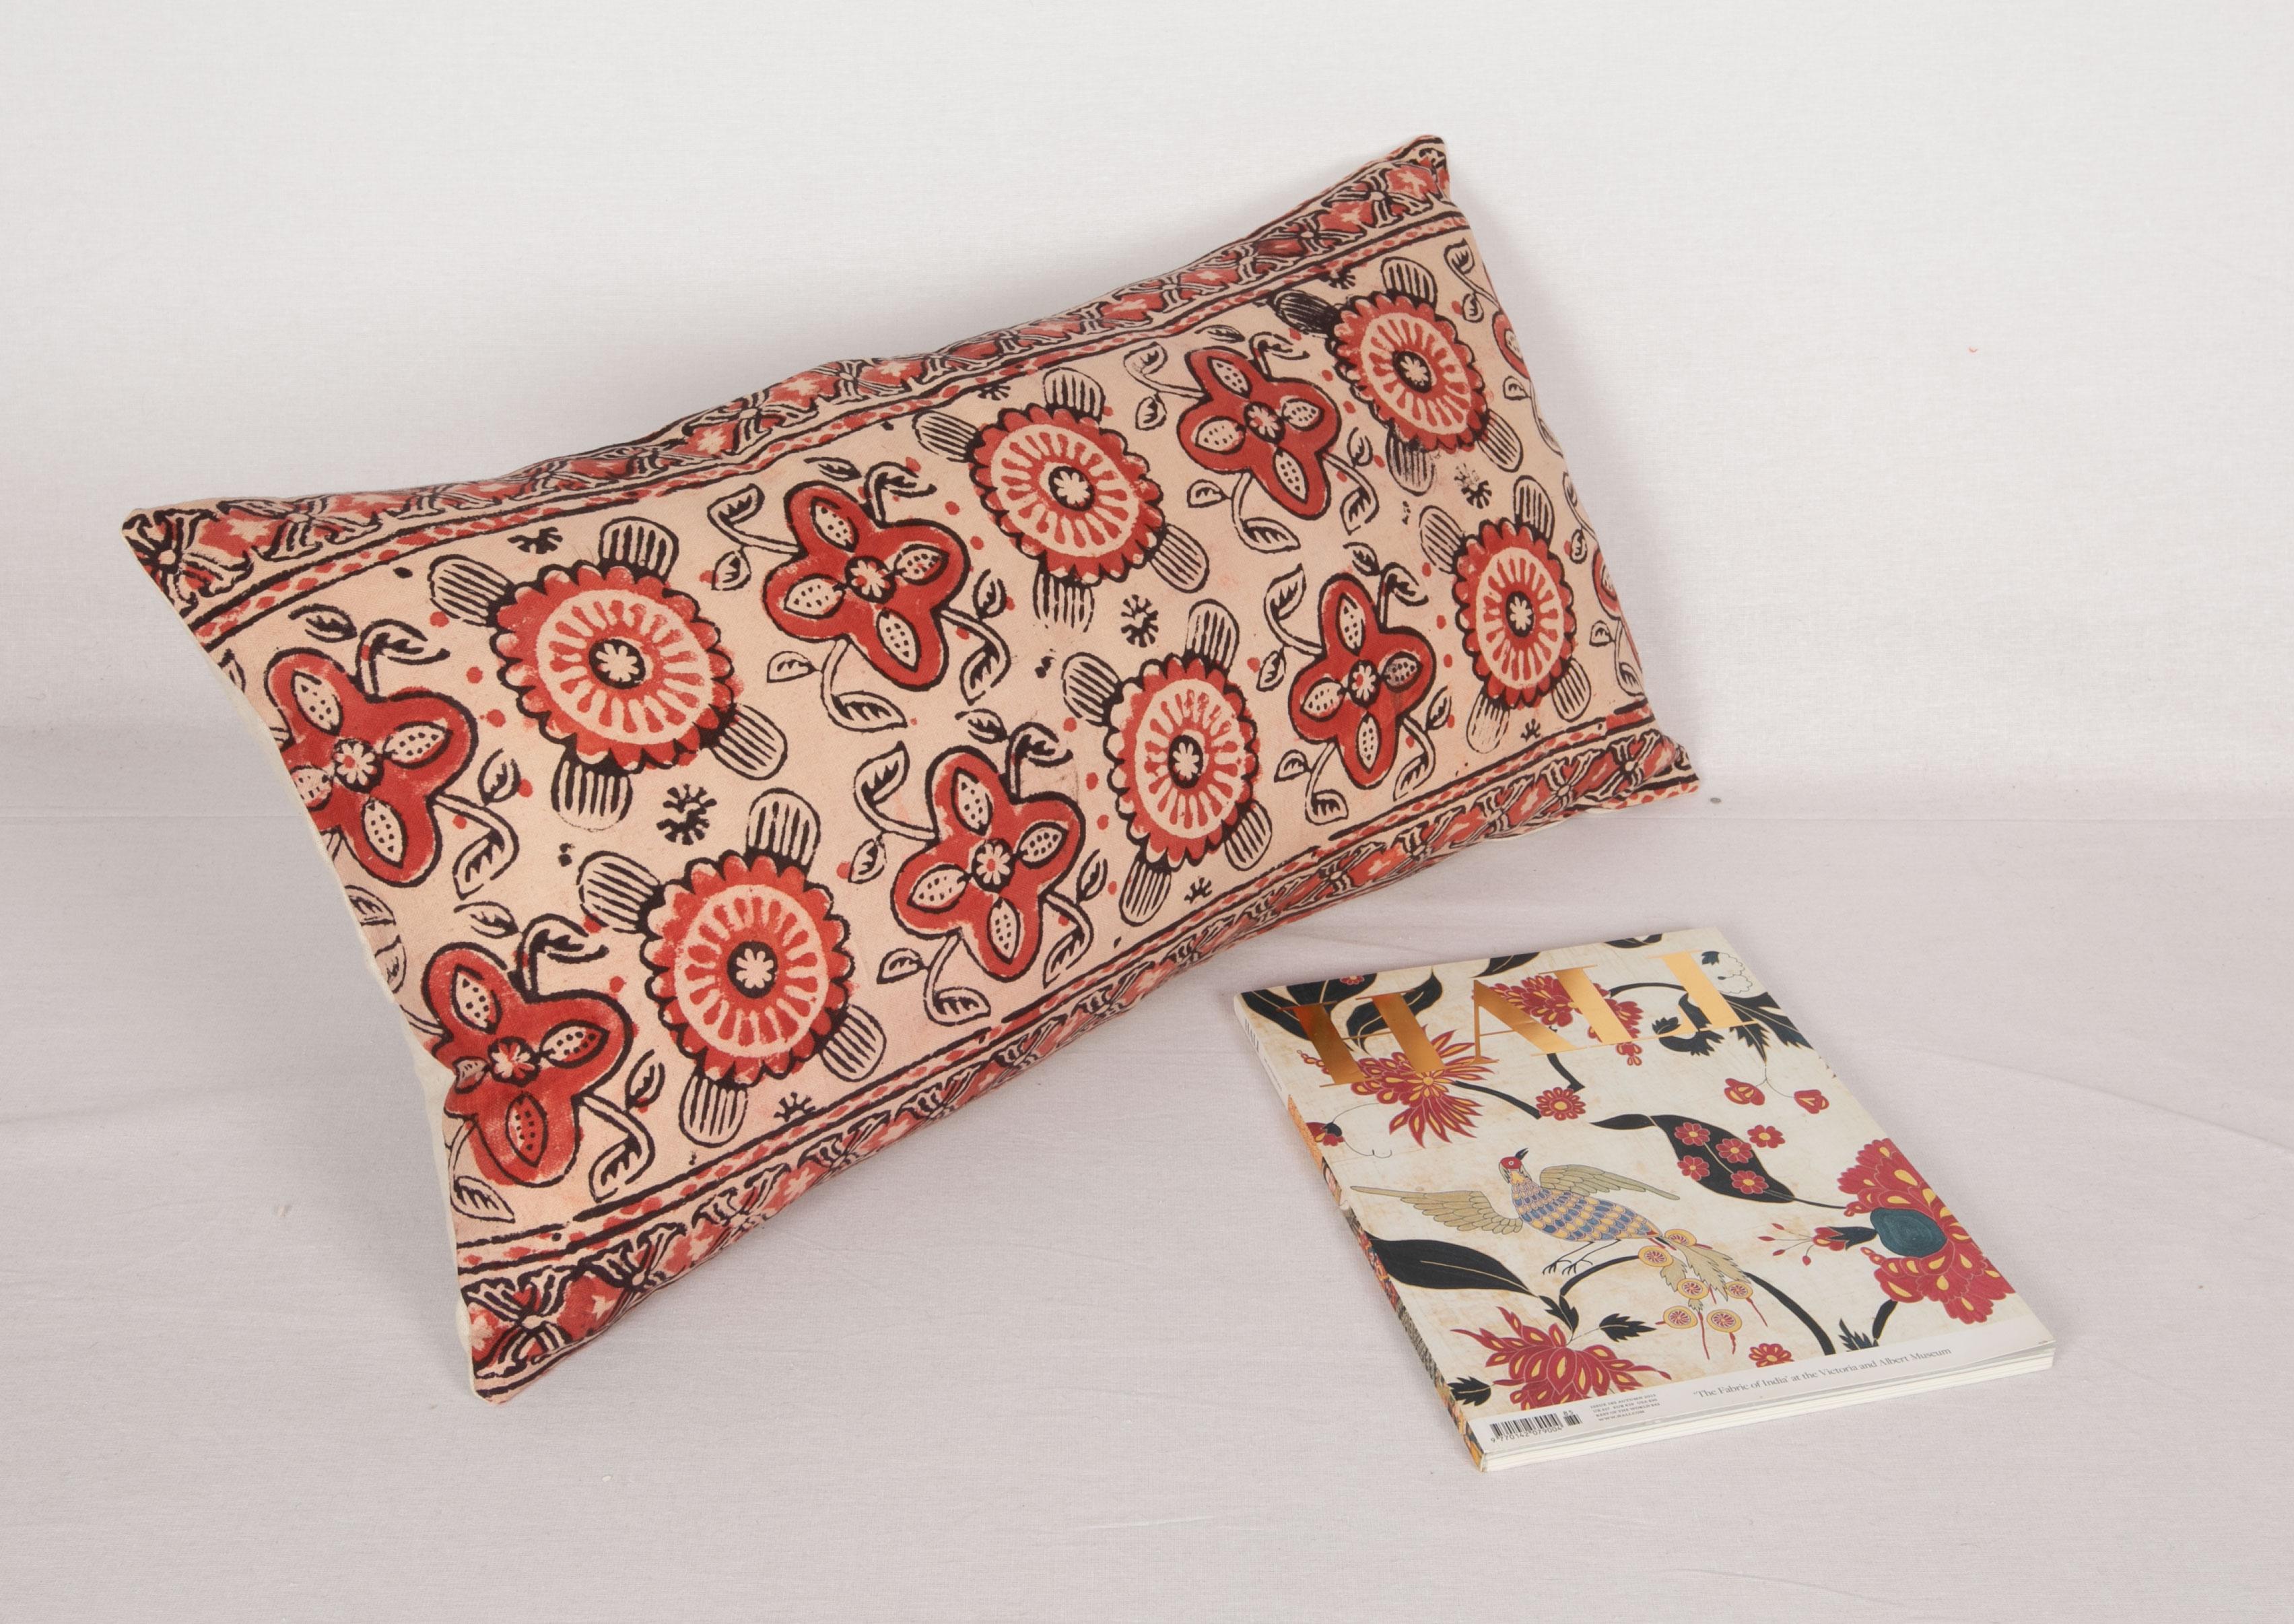 Pillow Case Made from an Uzbek Block Print, Early 20th C For Sale 1